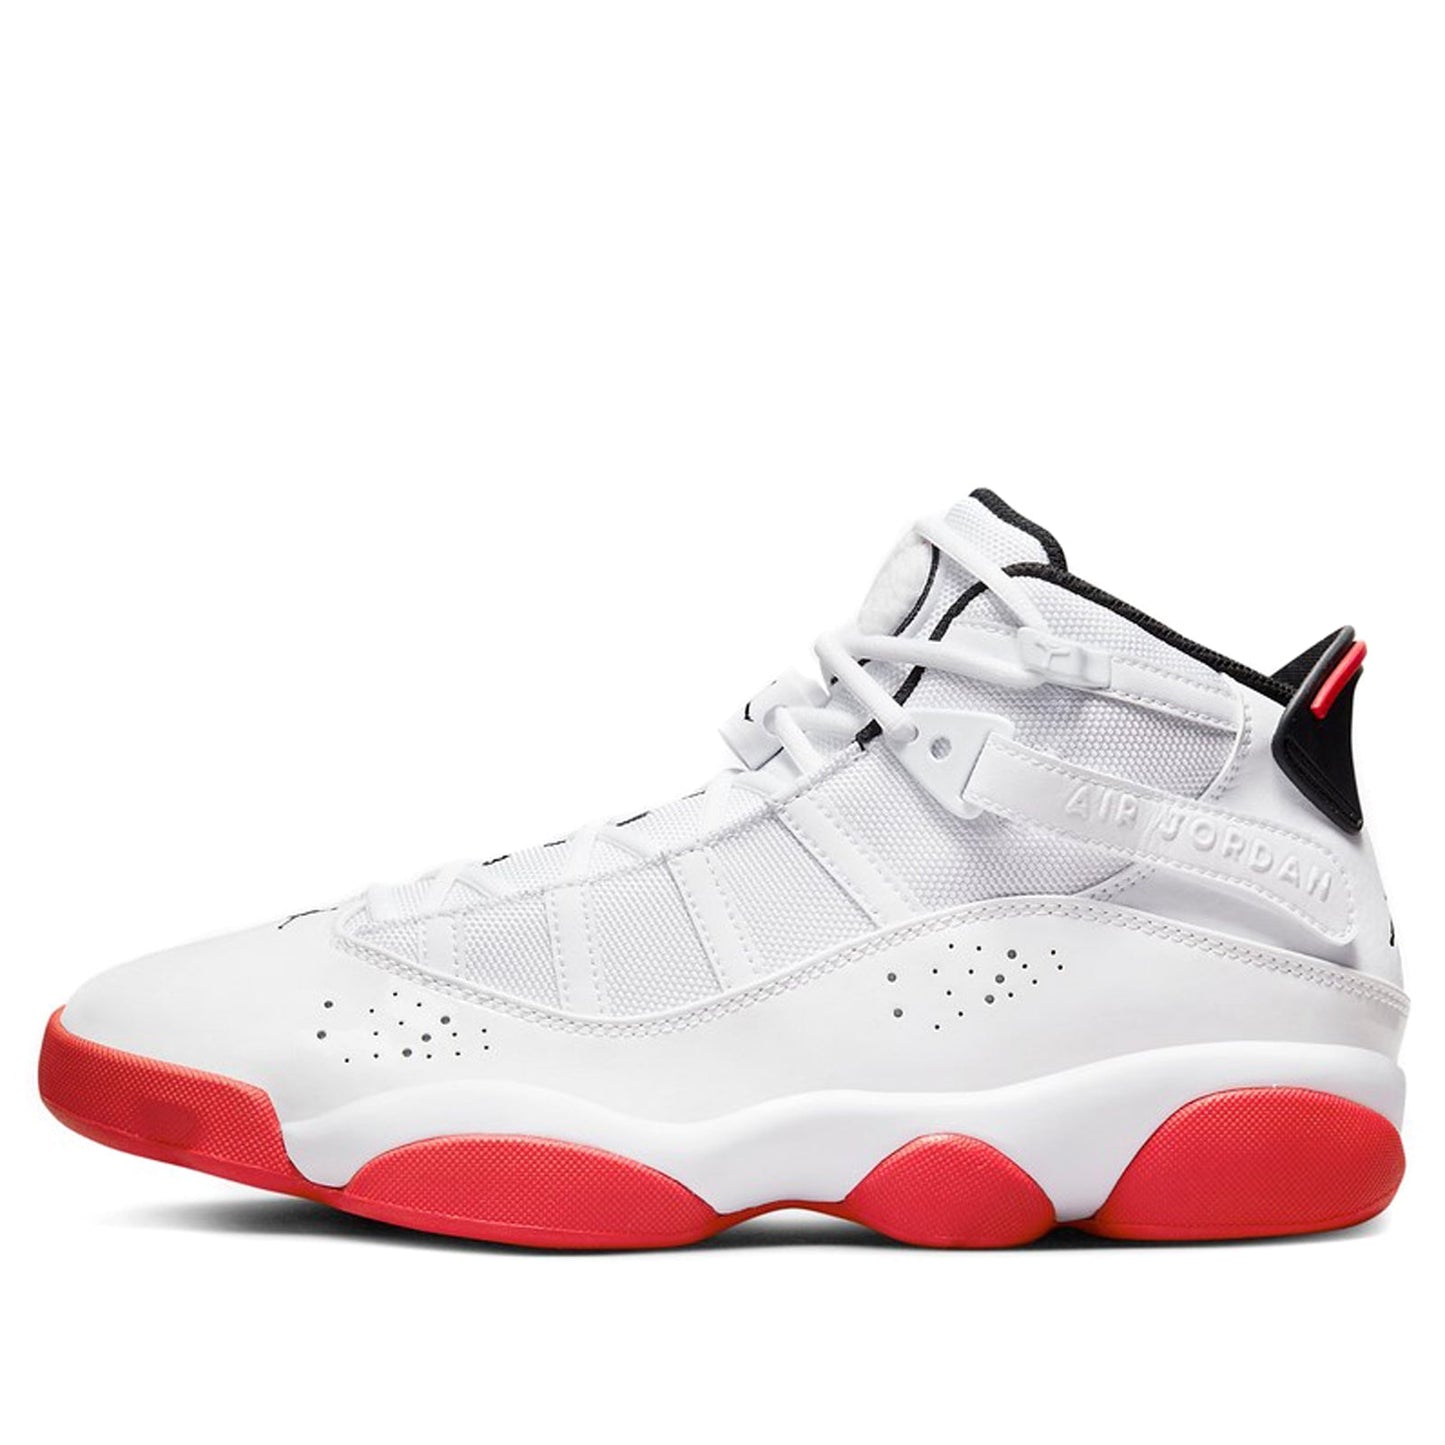 Air Jordan 6 Rings 'White University Red'  322992-160 Iconic Trainers